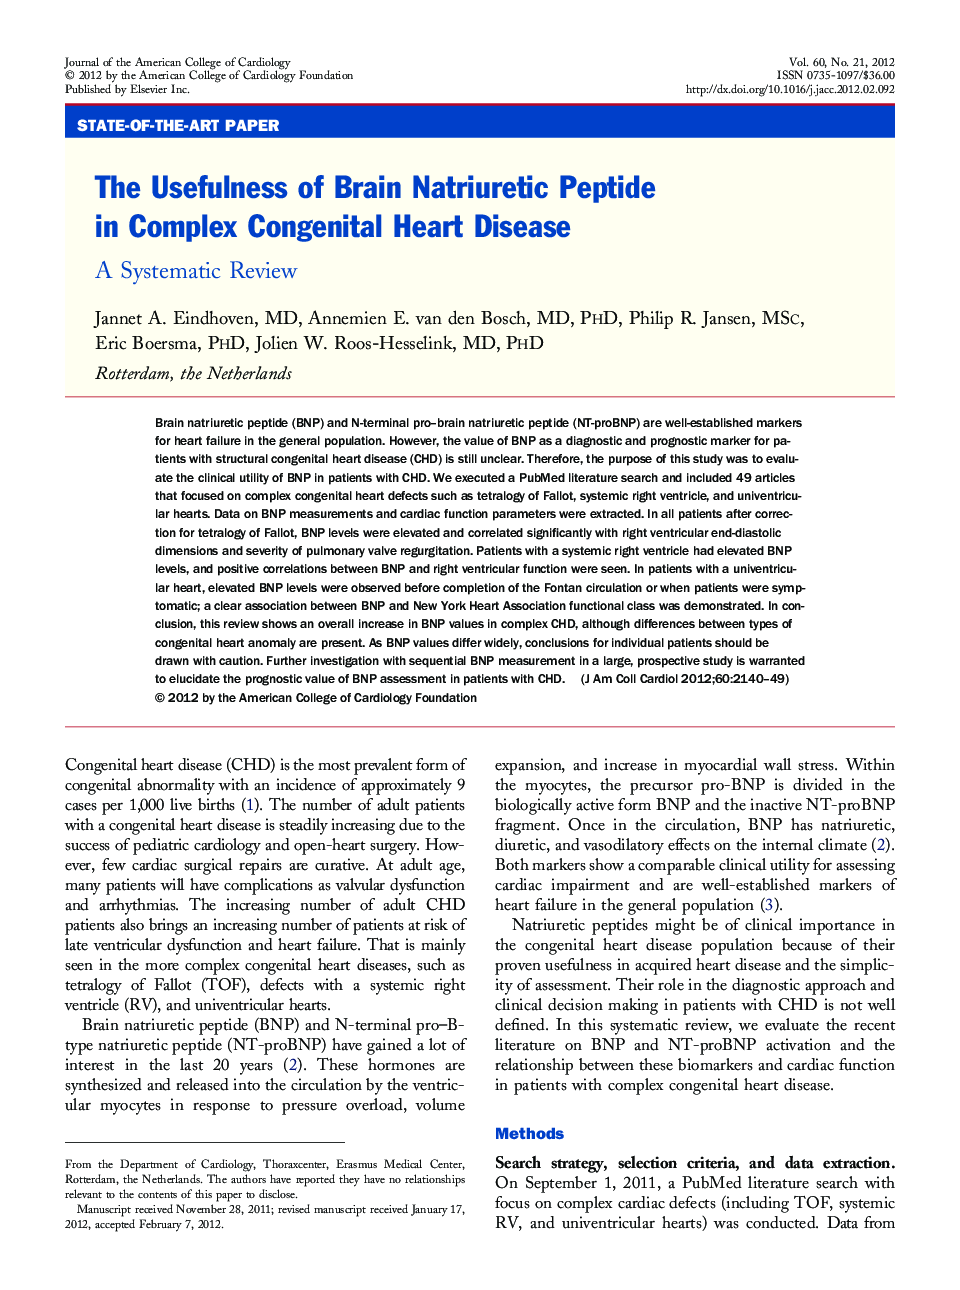 The Usefulness of Brain Natriuretic Peptide in Complex Congenital Heart Disease : A Systematic Review